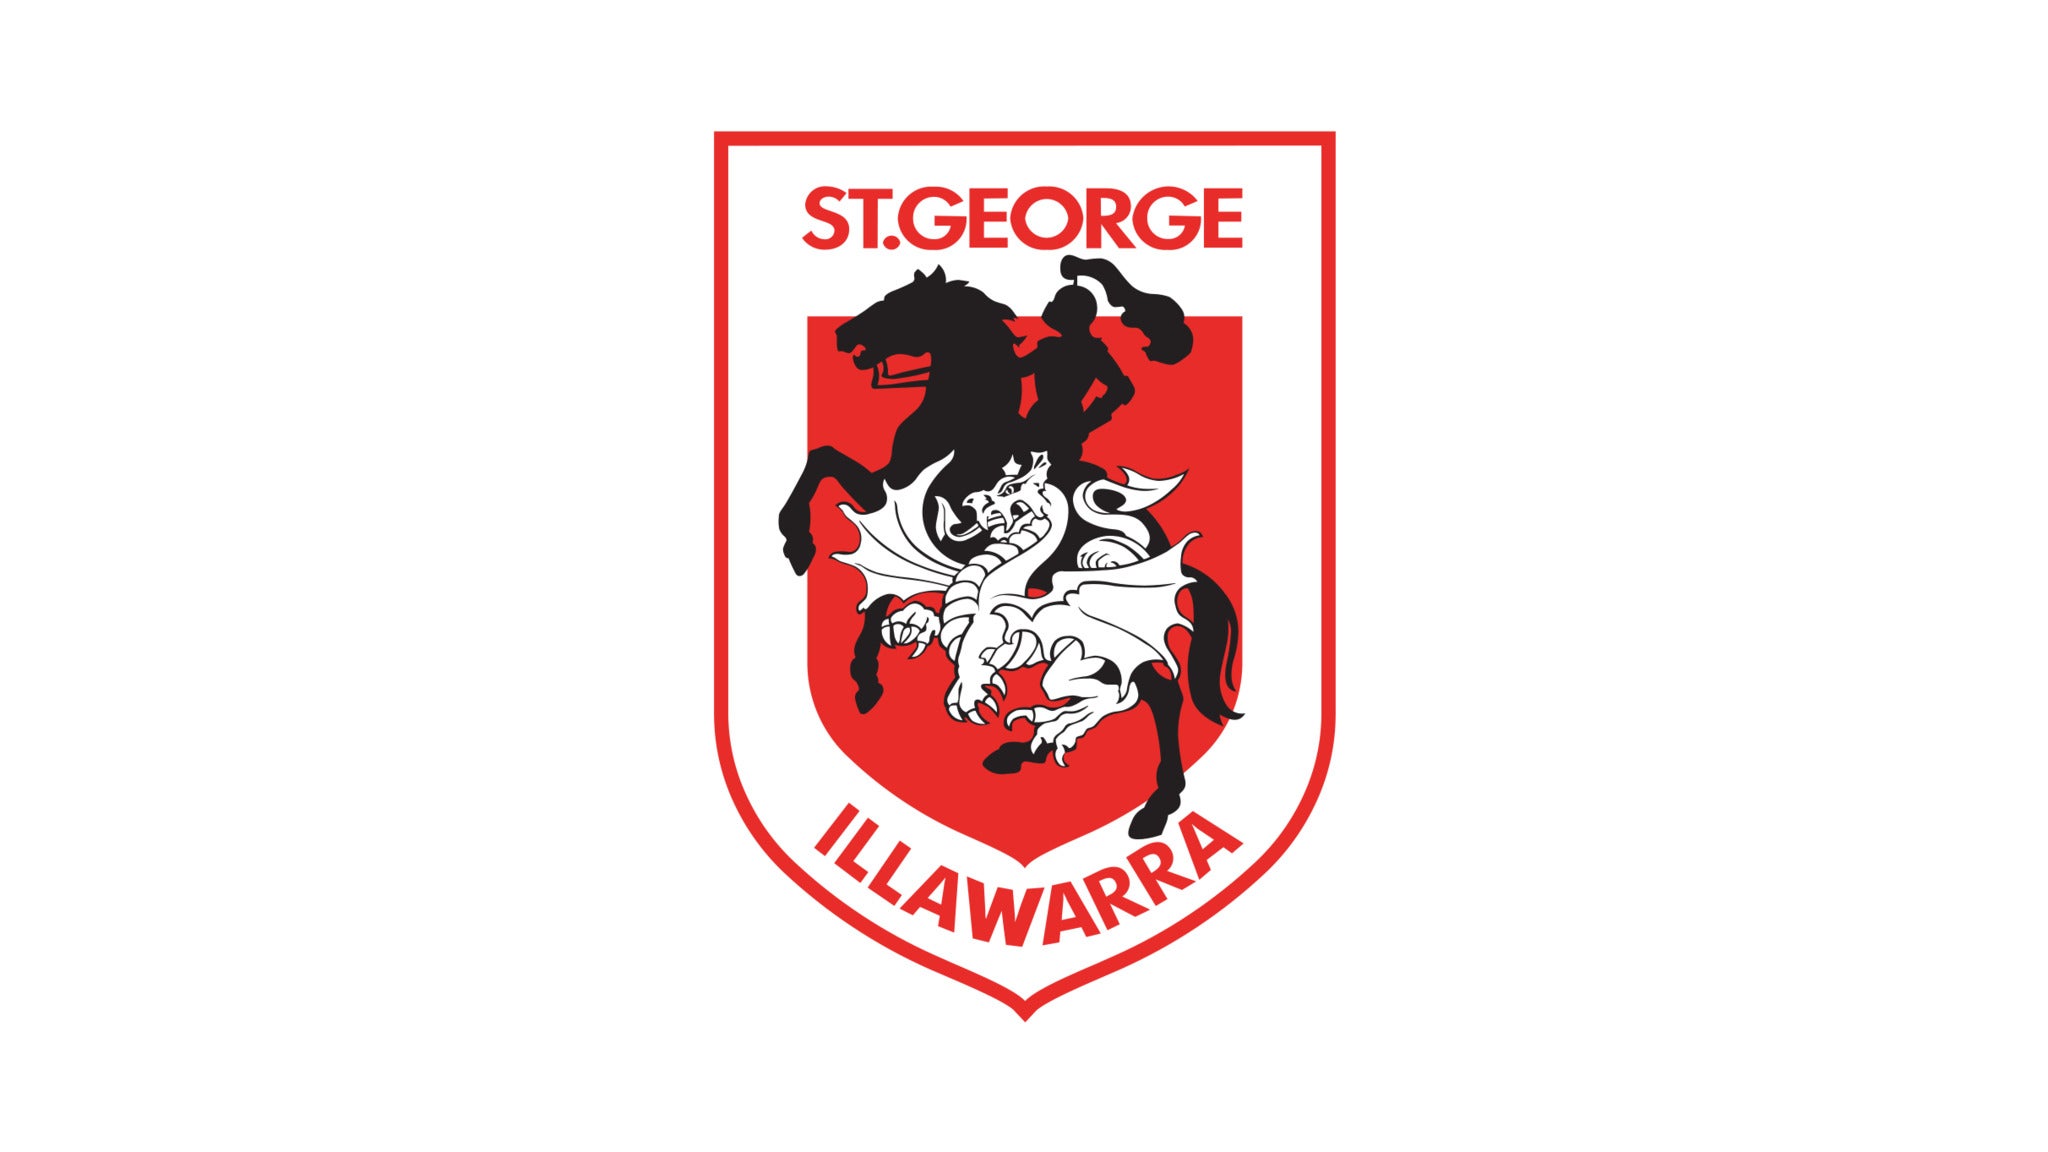 Image used with permission from Ticketmaster | St George Illawarra Dragons v Wests Tigers tickets